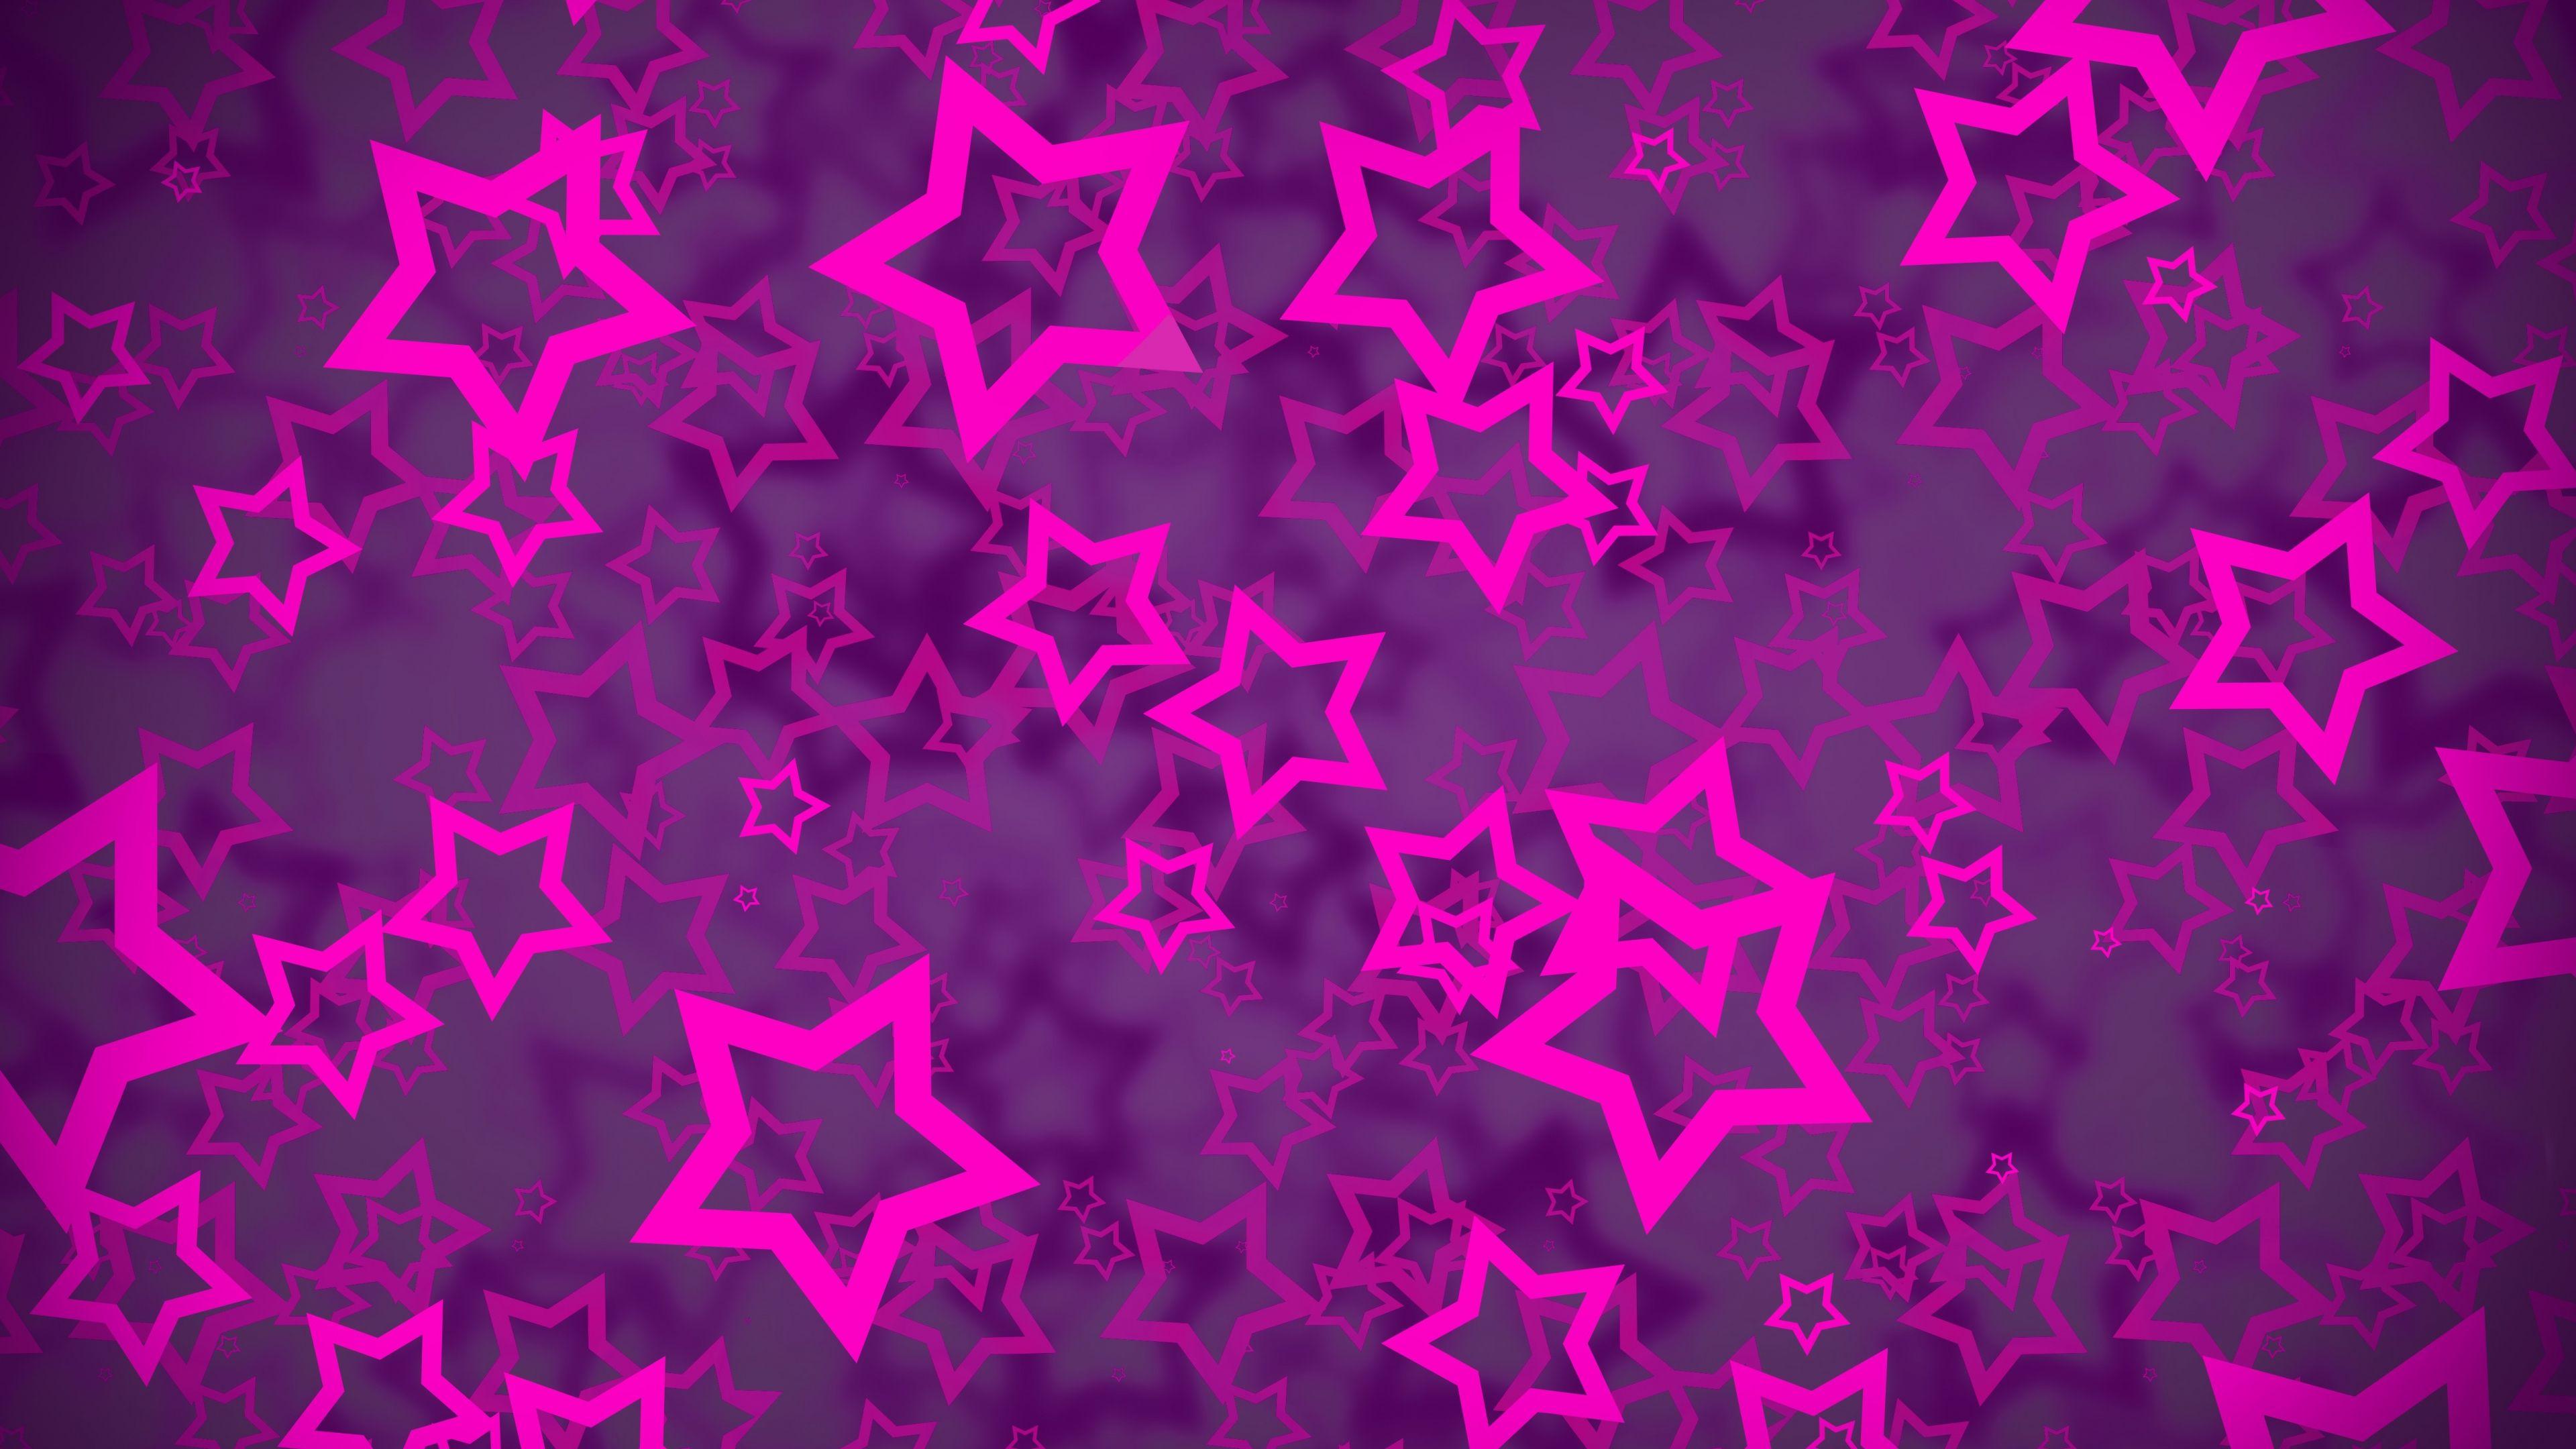 Purple Star Wallpapers Top Free Purple Star Backgrounds Wallpaperaccess See more ideas about purple aesthetic, aesthetic wallpapers, purple wallpaper. purple star wallpapers top free